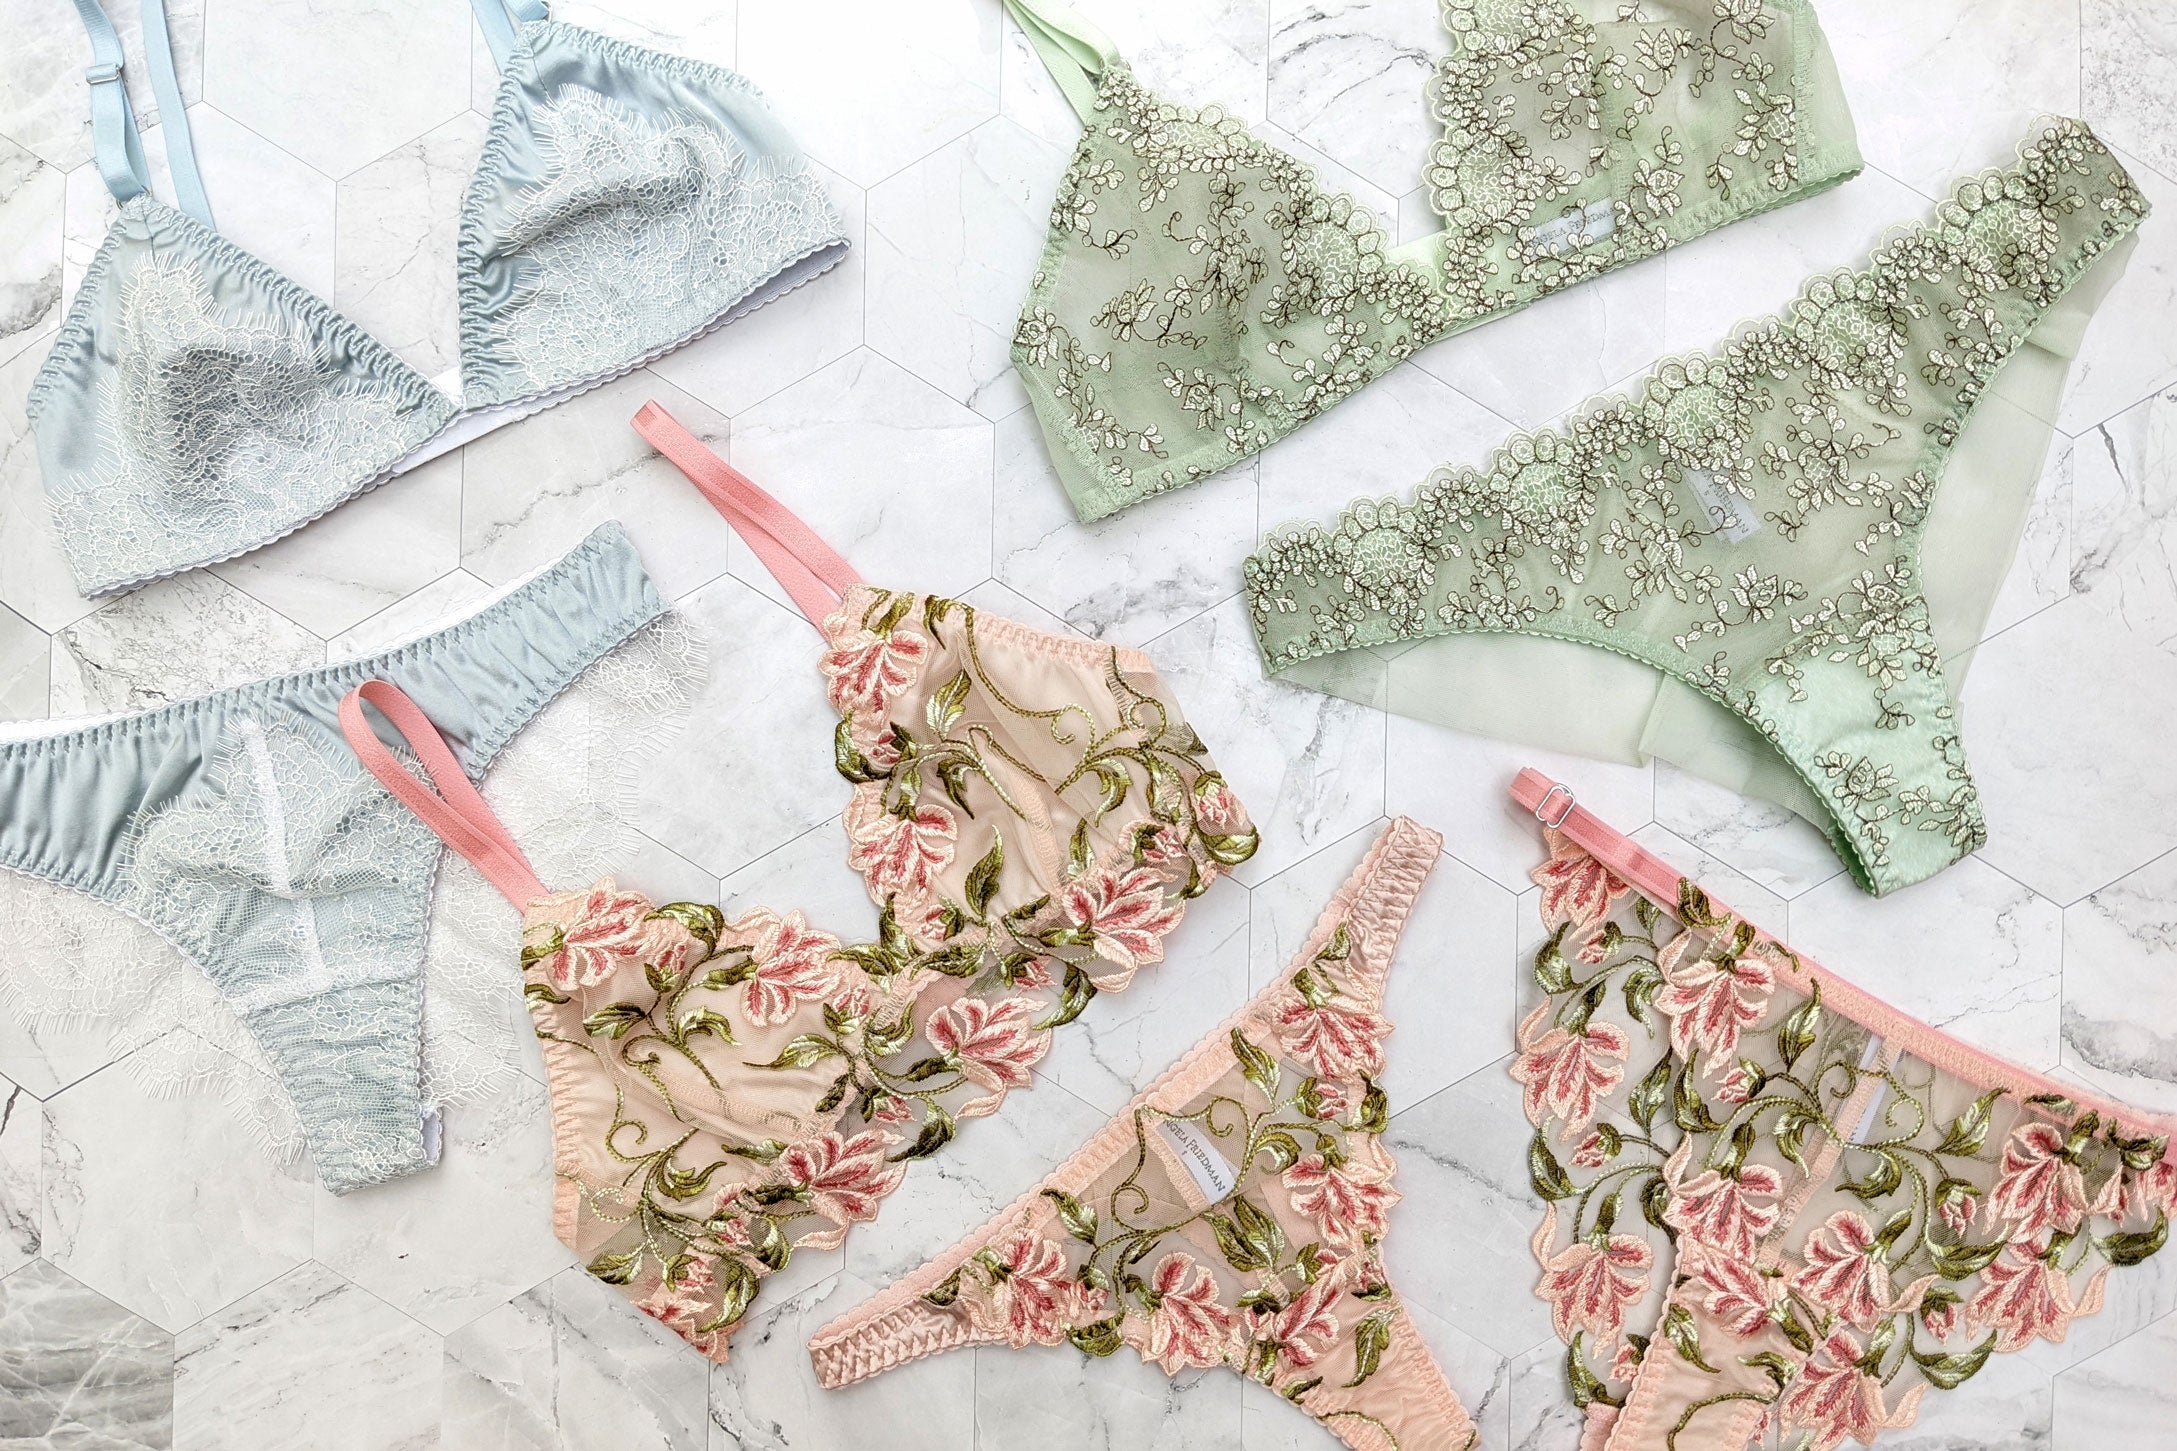 Luxury lingerie sets in blue, pink, and green with embroidery and French lace